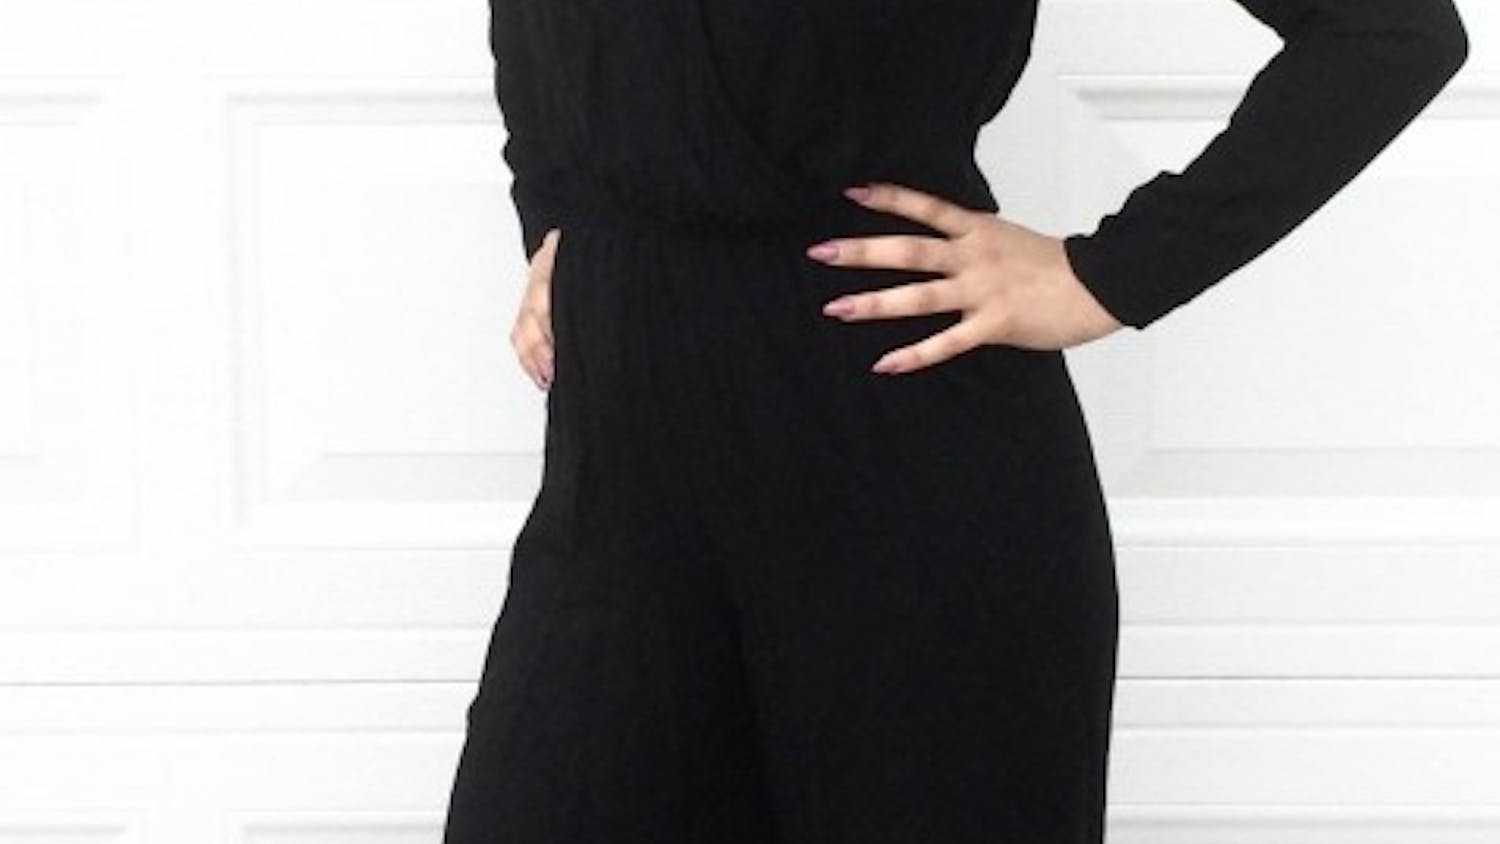 Find a similar jumpsuit here!